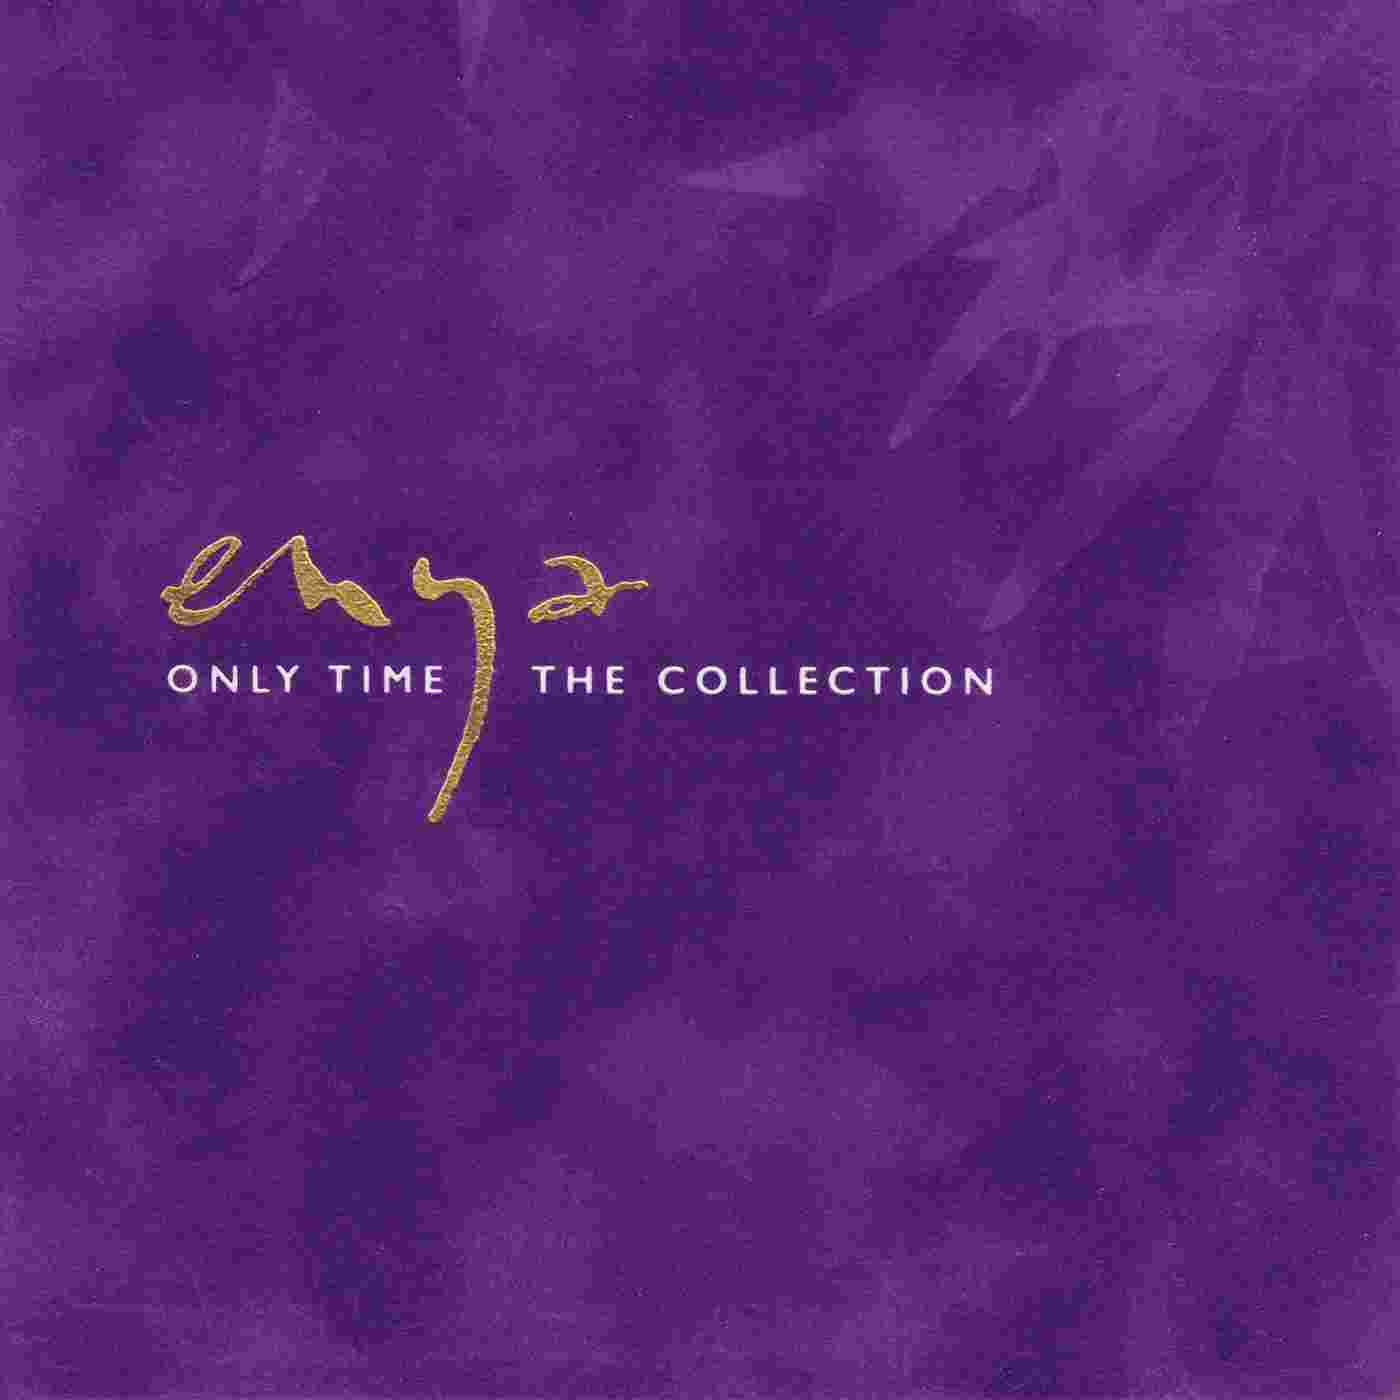 [Enya][2002.11.05]Only Time - The Collection.jpg